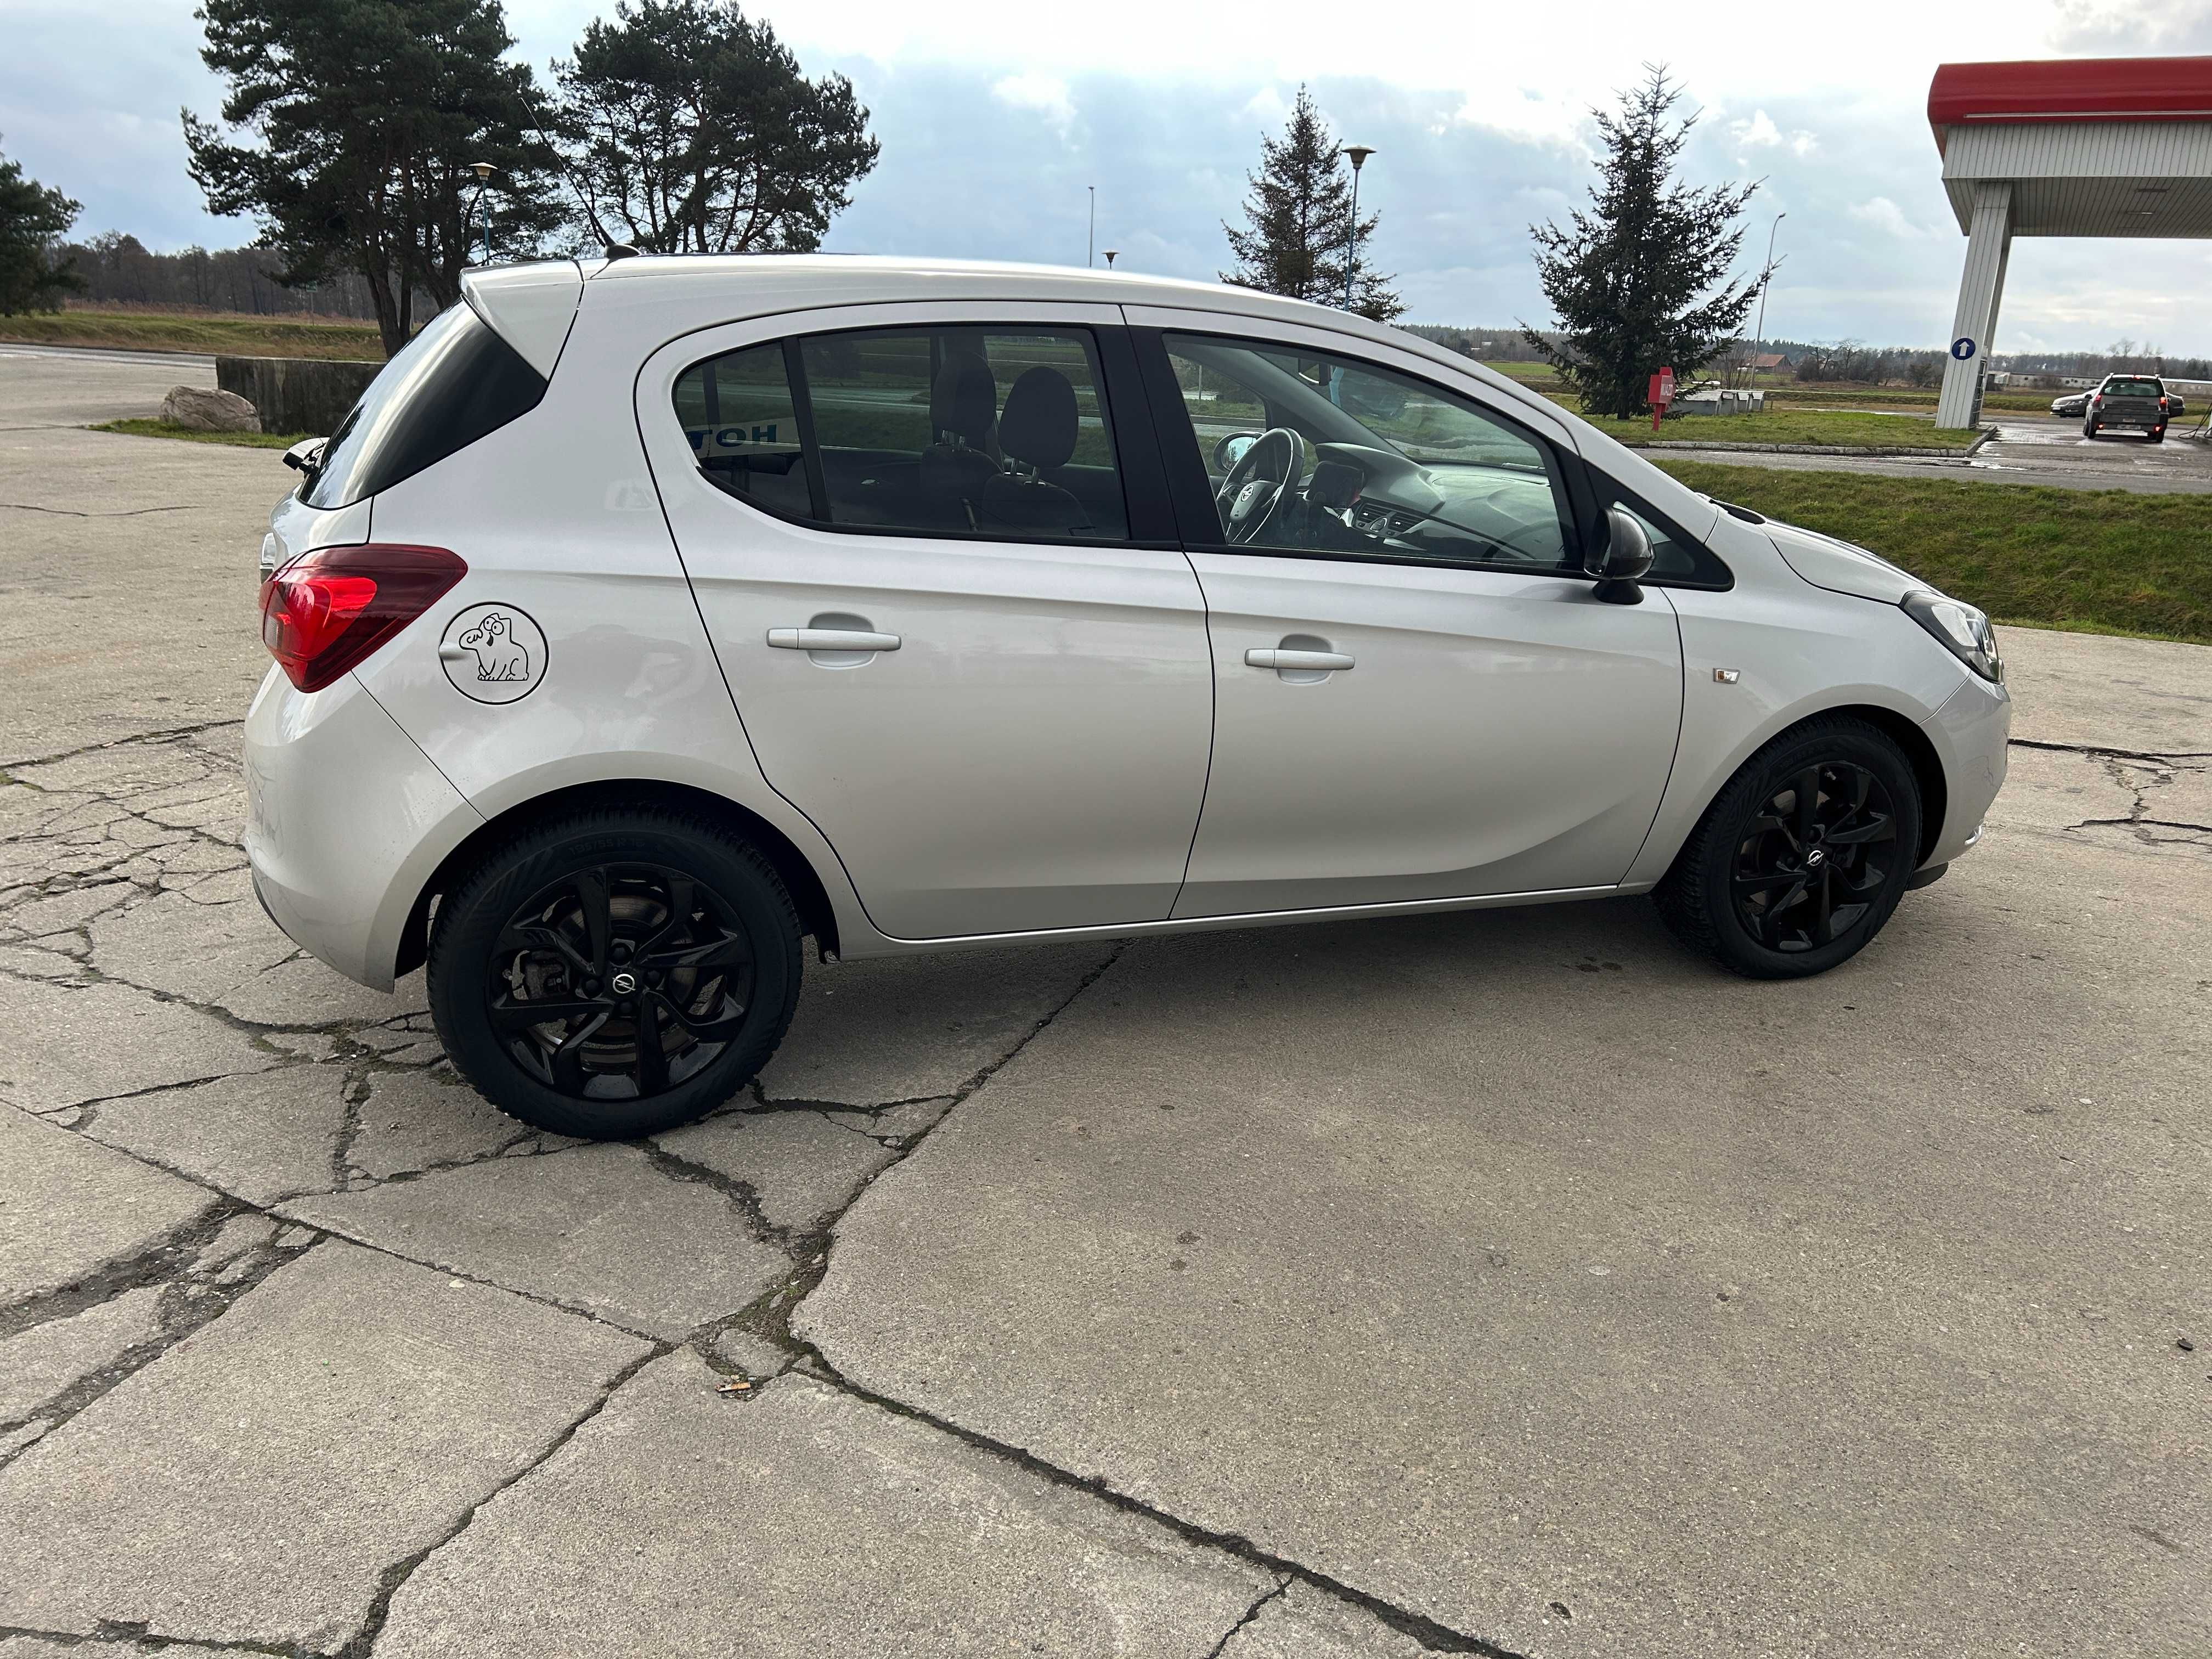 Opel Corsa 1,4T COLOR EDITION 5 drzwi 70 tys. km